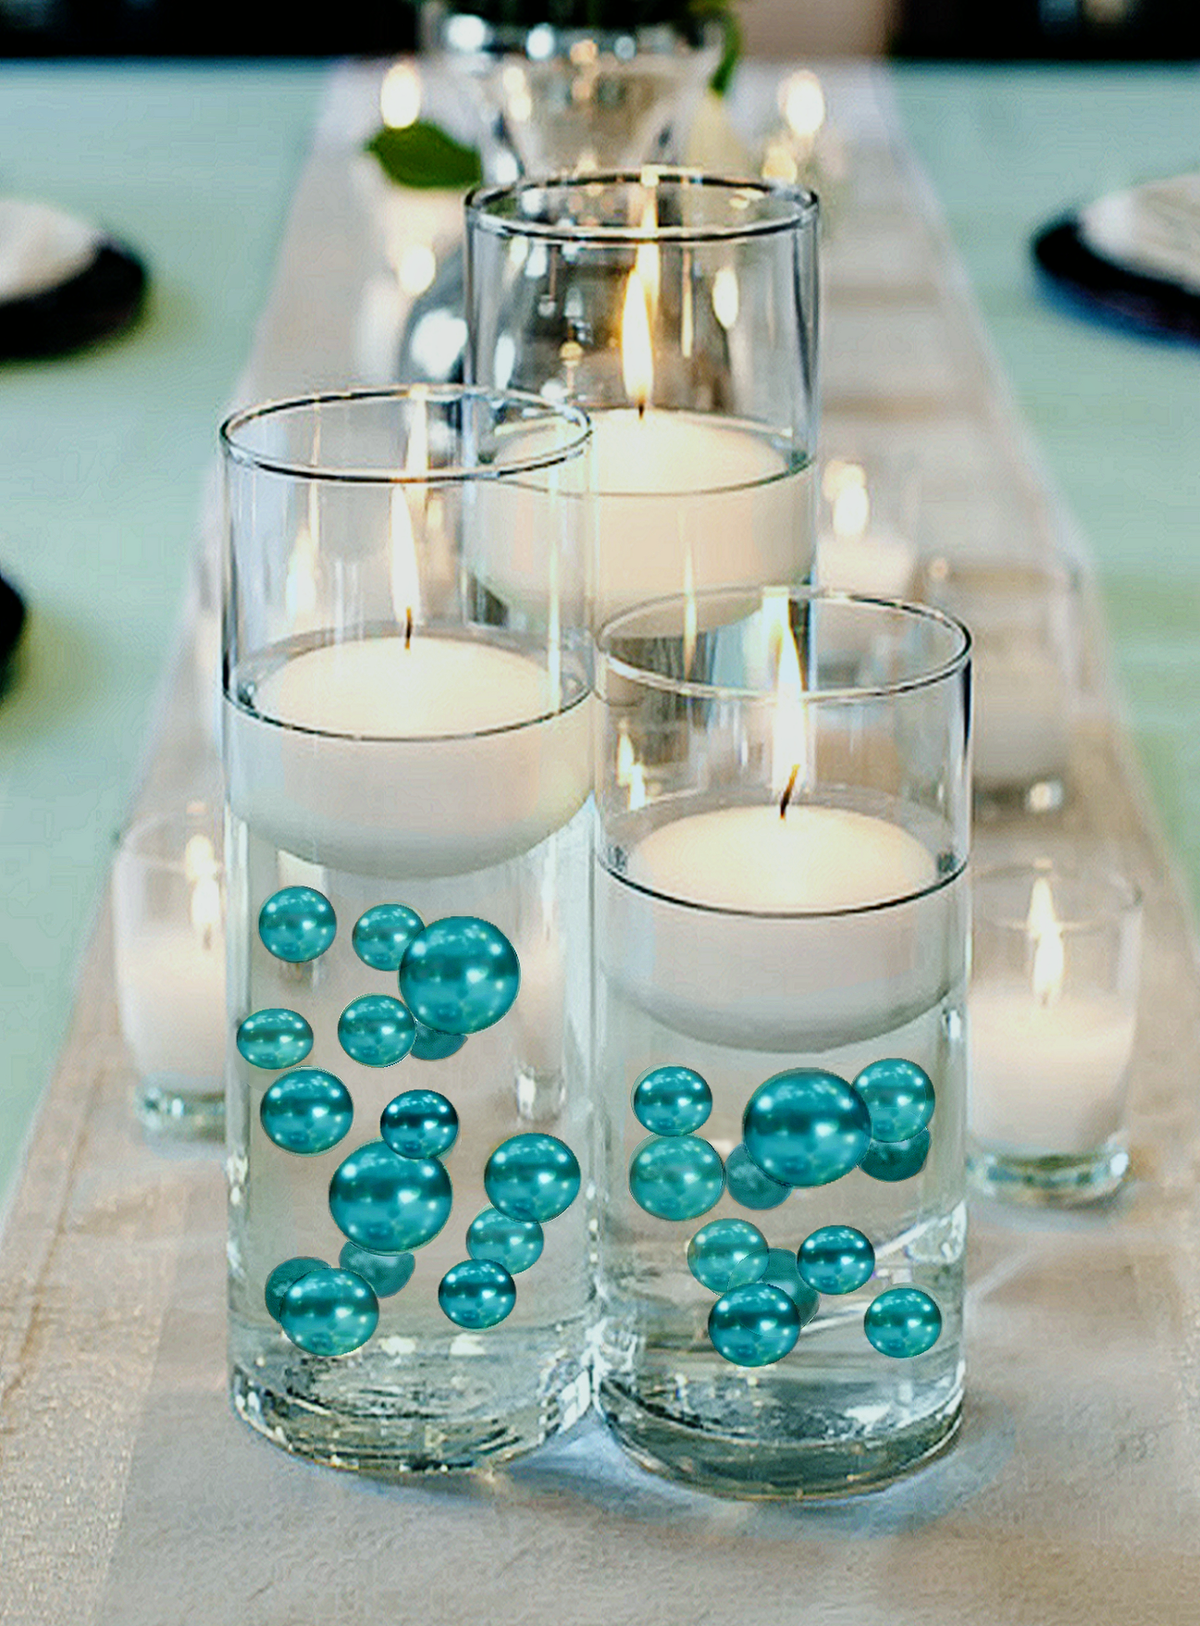 Tiffany/Light Blue Pearls for Vase Decorations – Floating Pearls